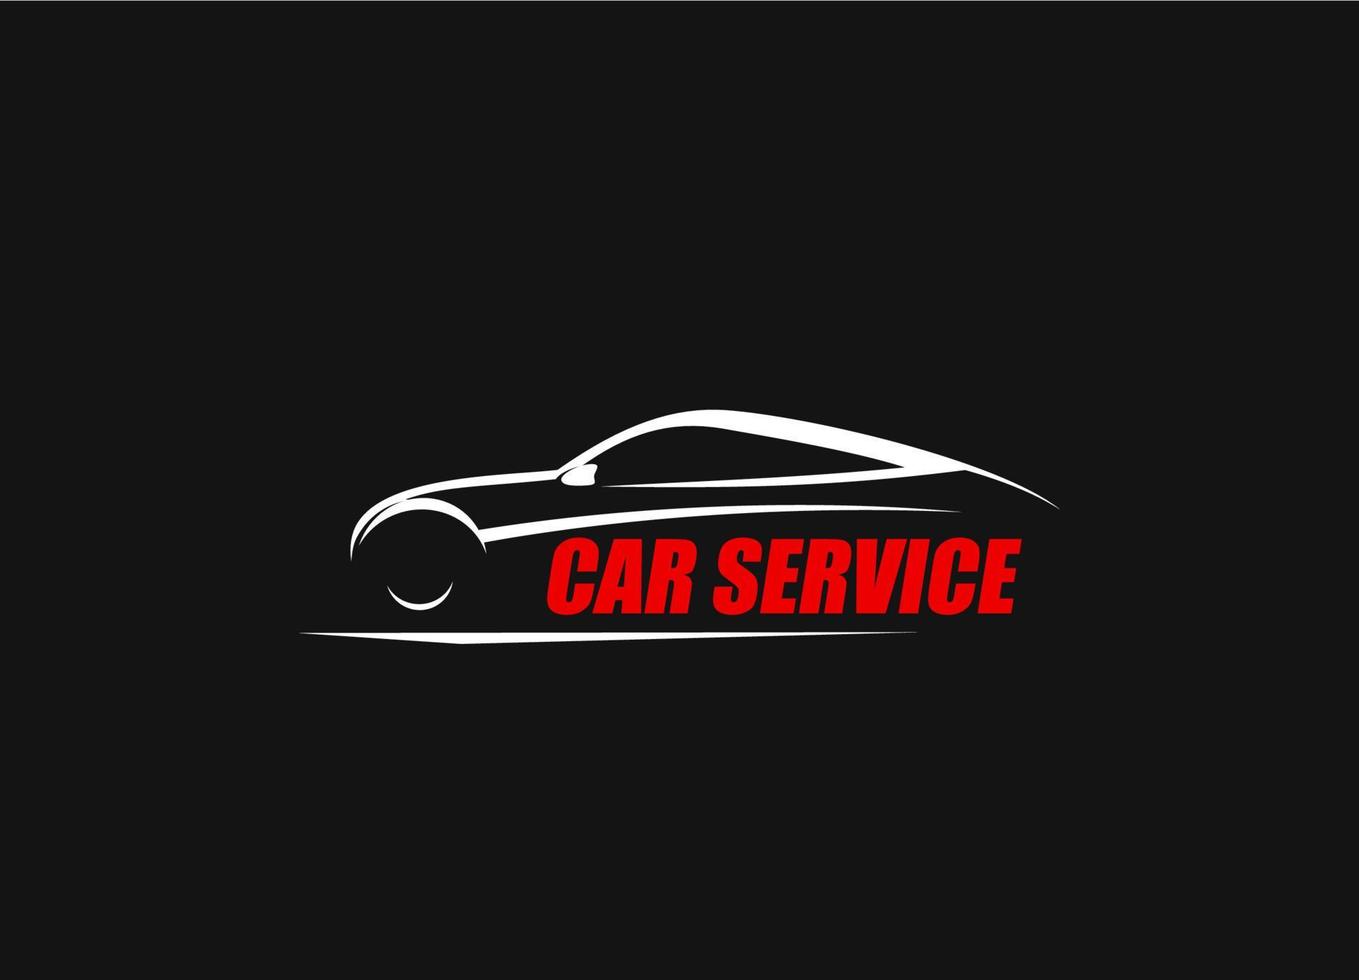 Car service workshop, vehicle repair station icon vector